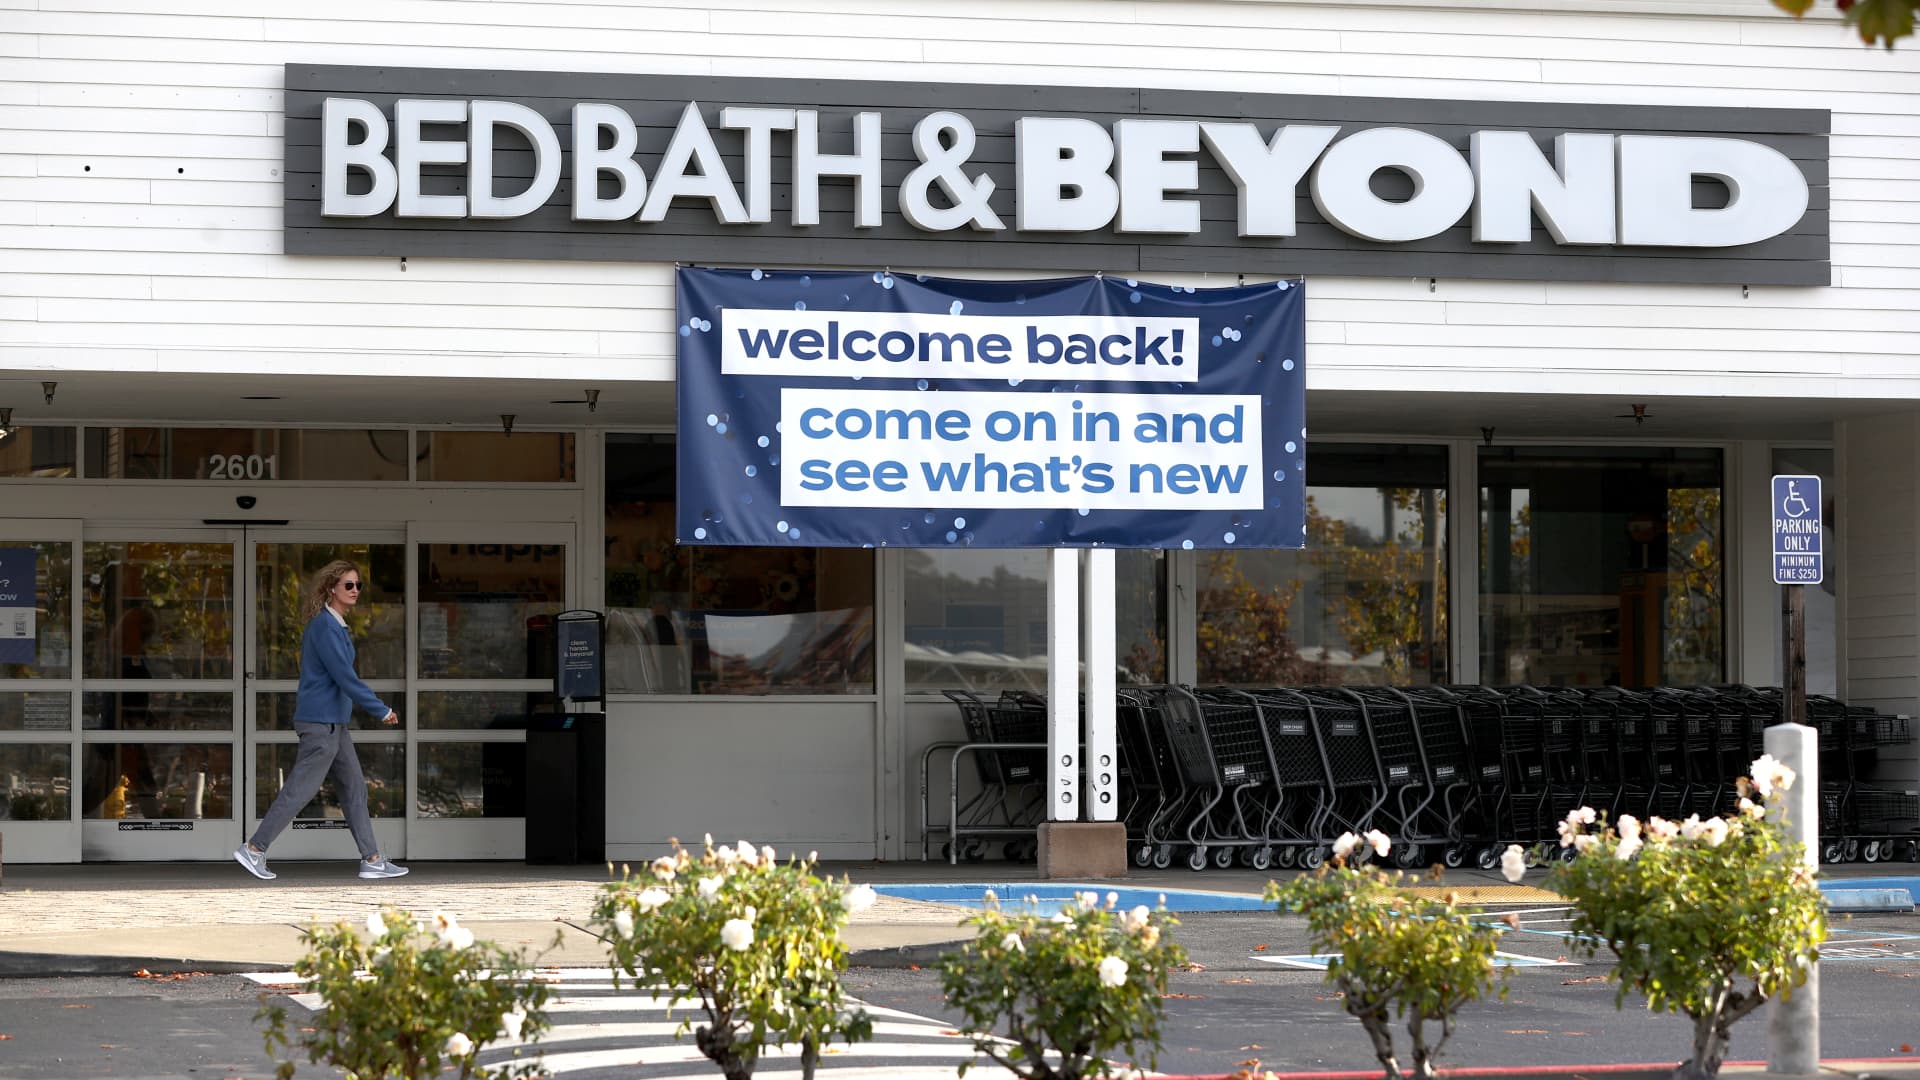 Bed Bath & Beyond (BBBY) Q4 2021 earnings